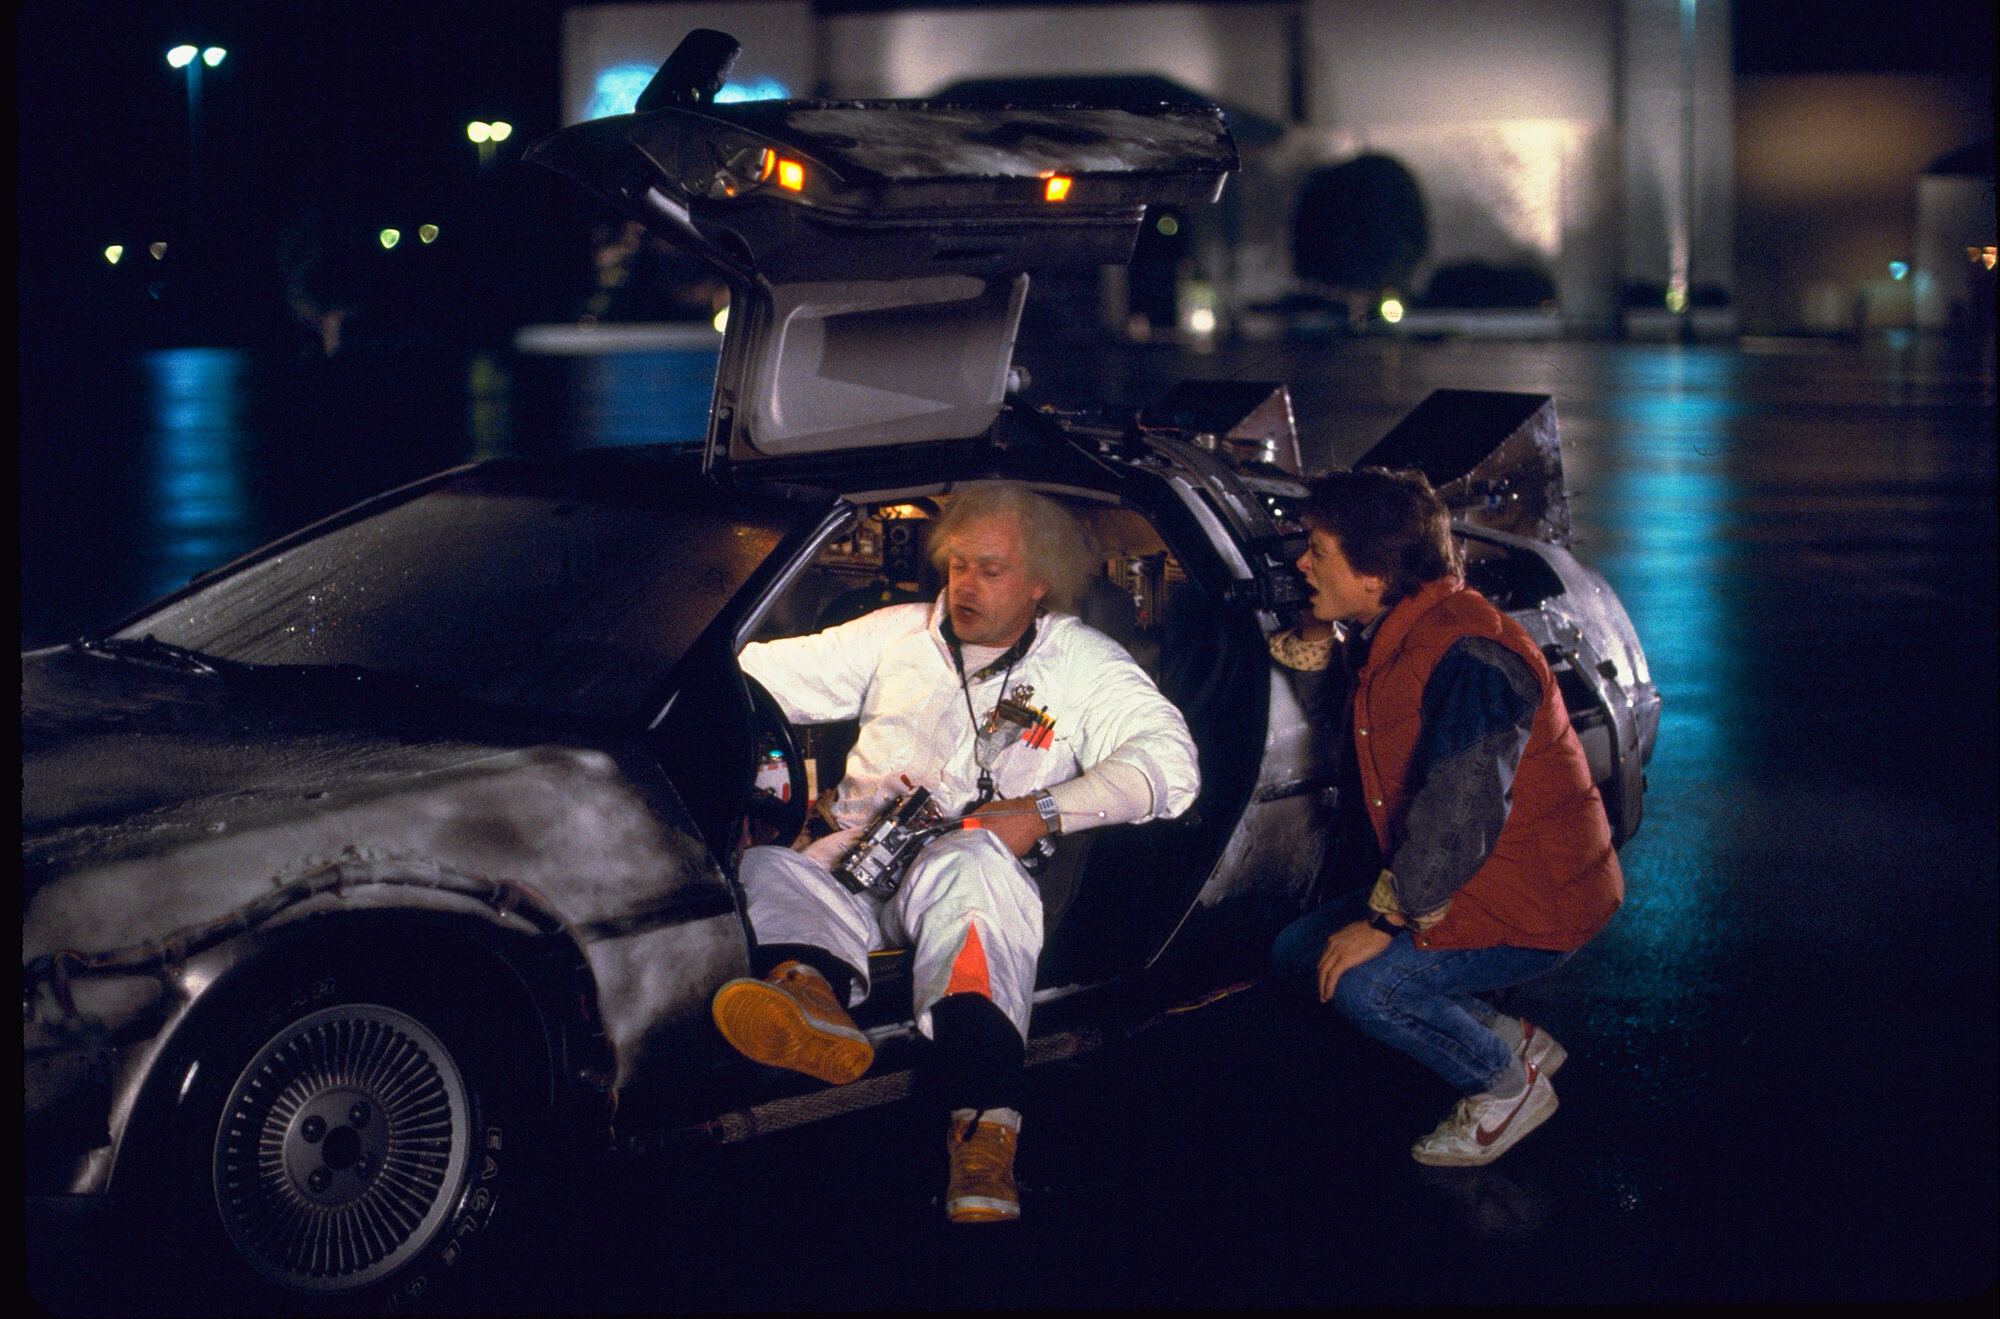 How Back to the Future Made the DeLorean Car Famous